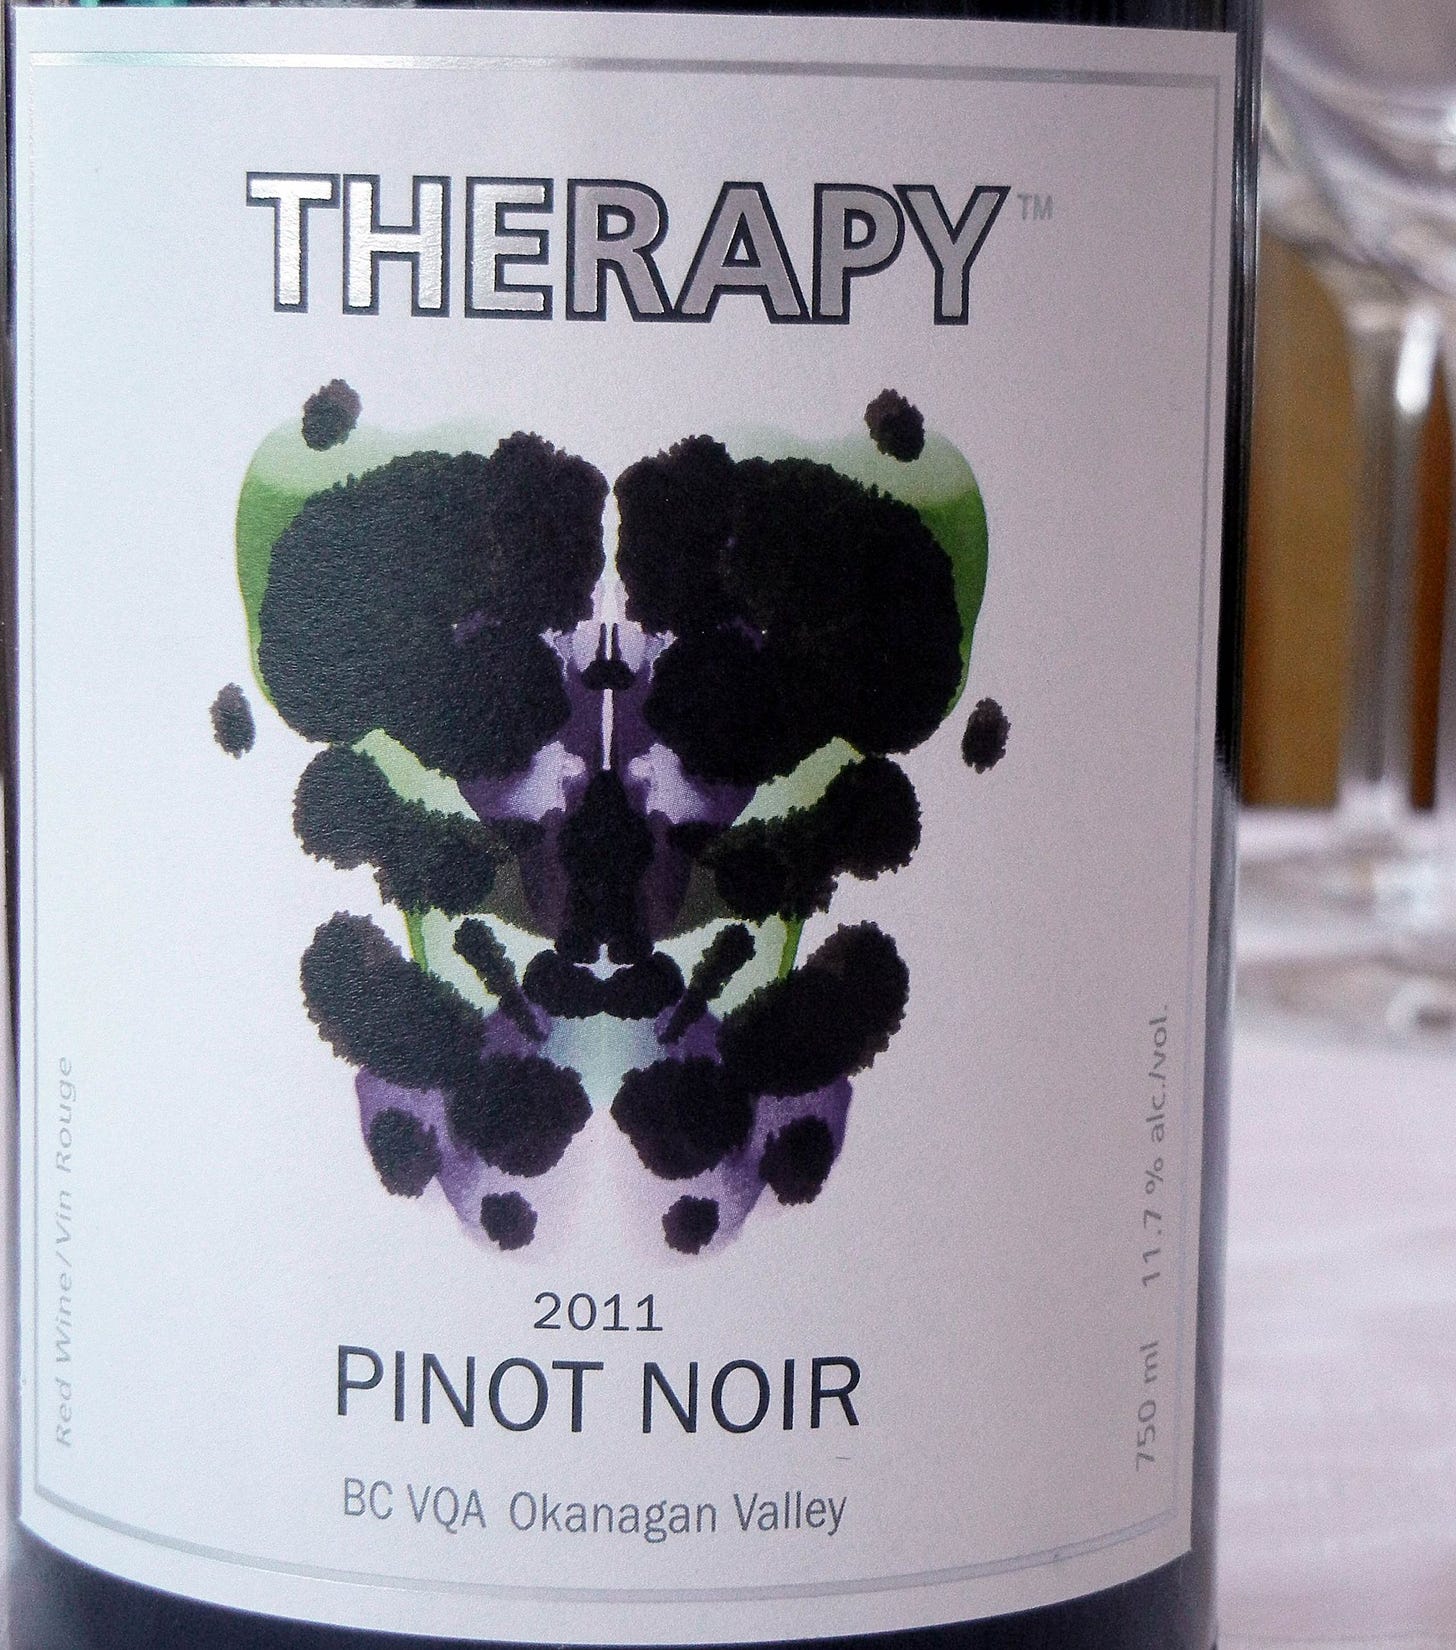 B.C. Pinot Noir Therapy 2011